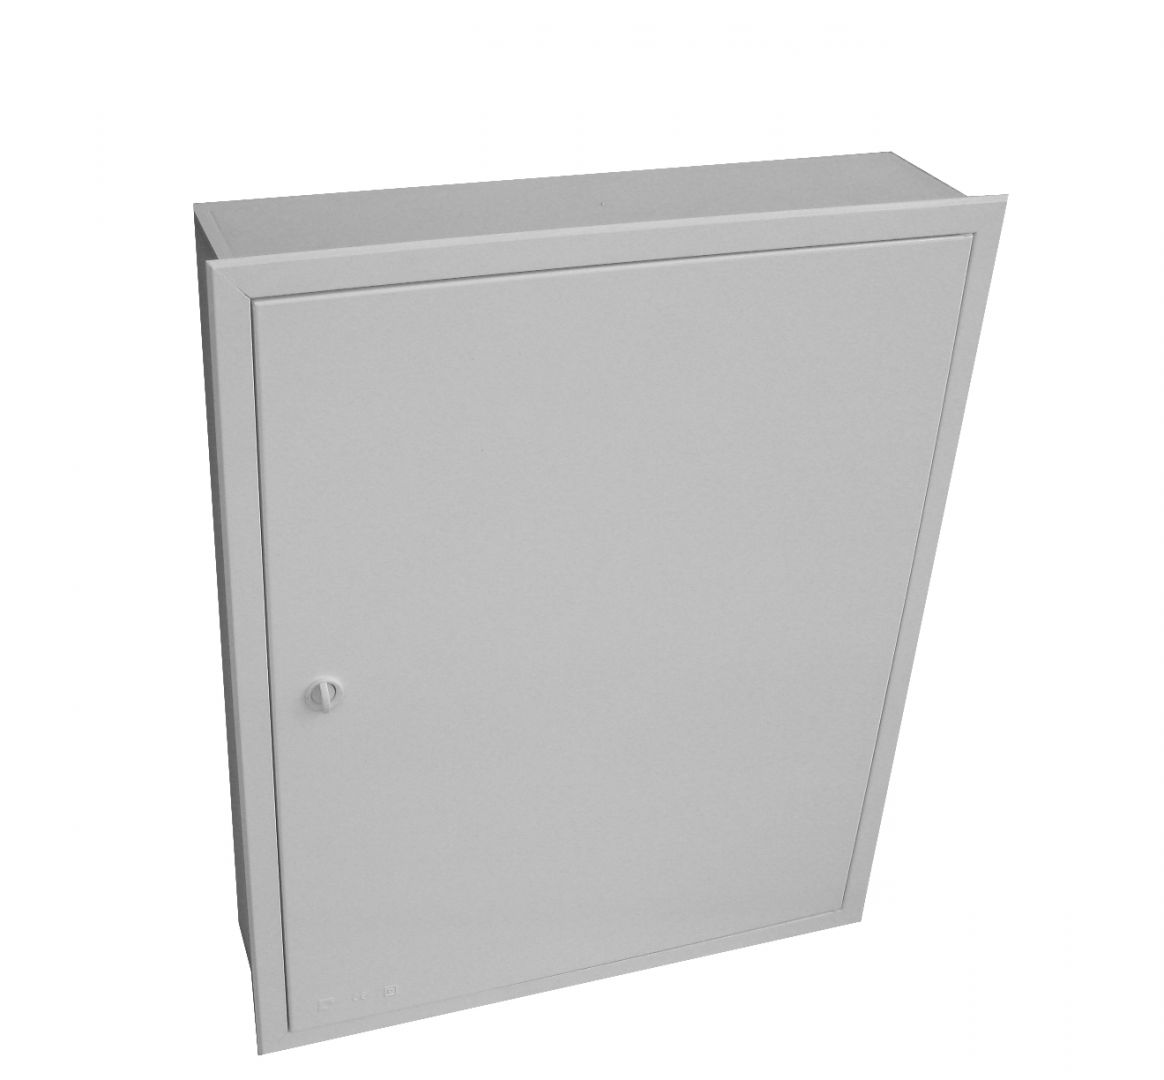 EMPTY BUILT-IN VISBOX BOX WITH DOOR AND FRAME 500X500X130